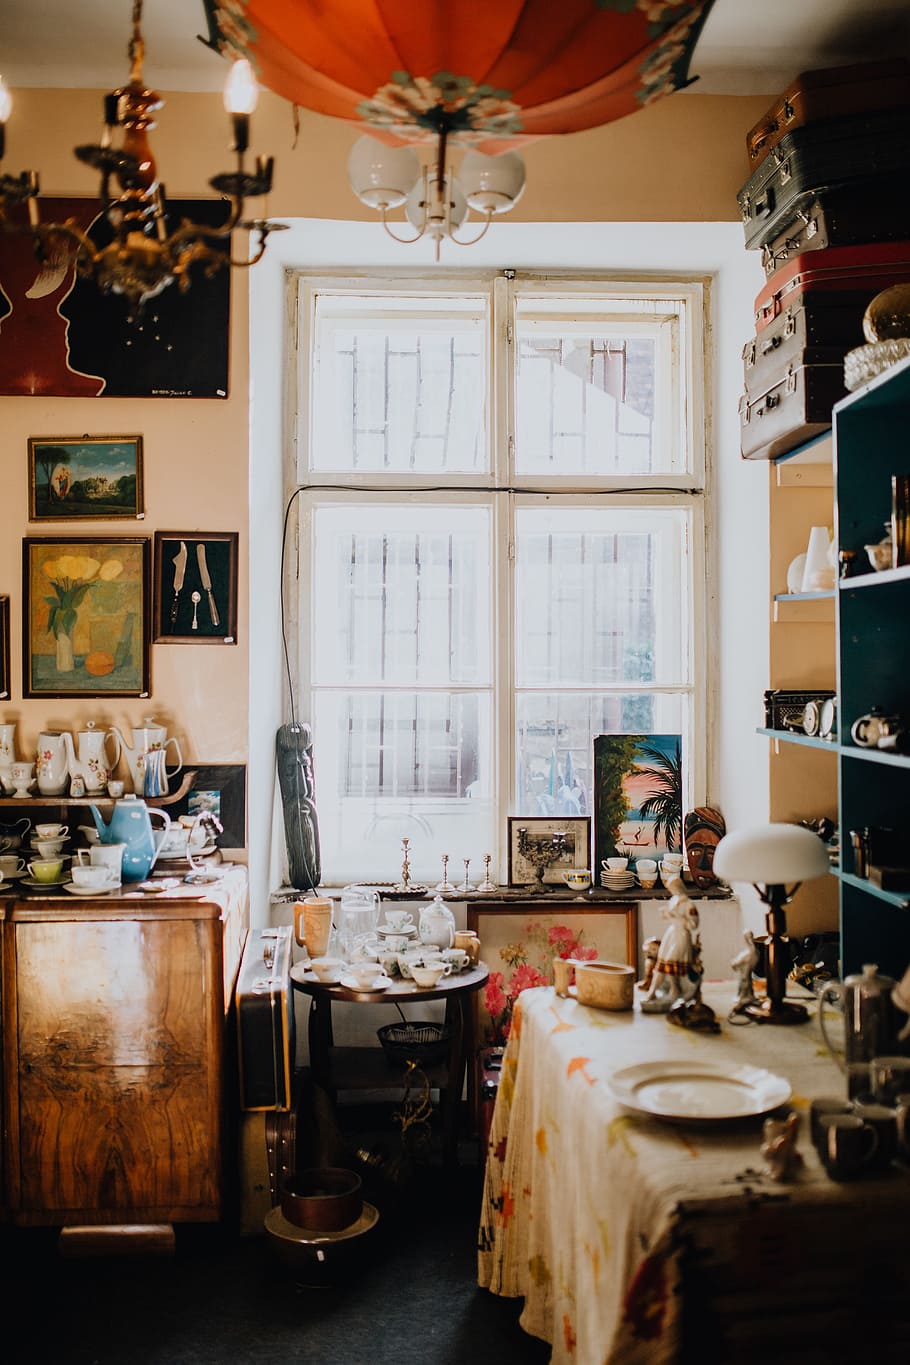 Antique shop filled with antiquity, vintage, old, Poland, retro